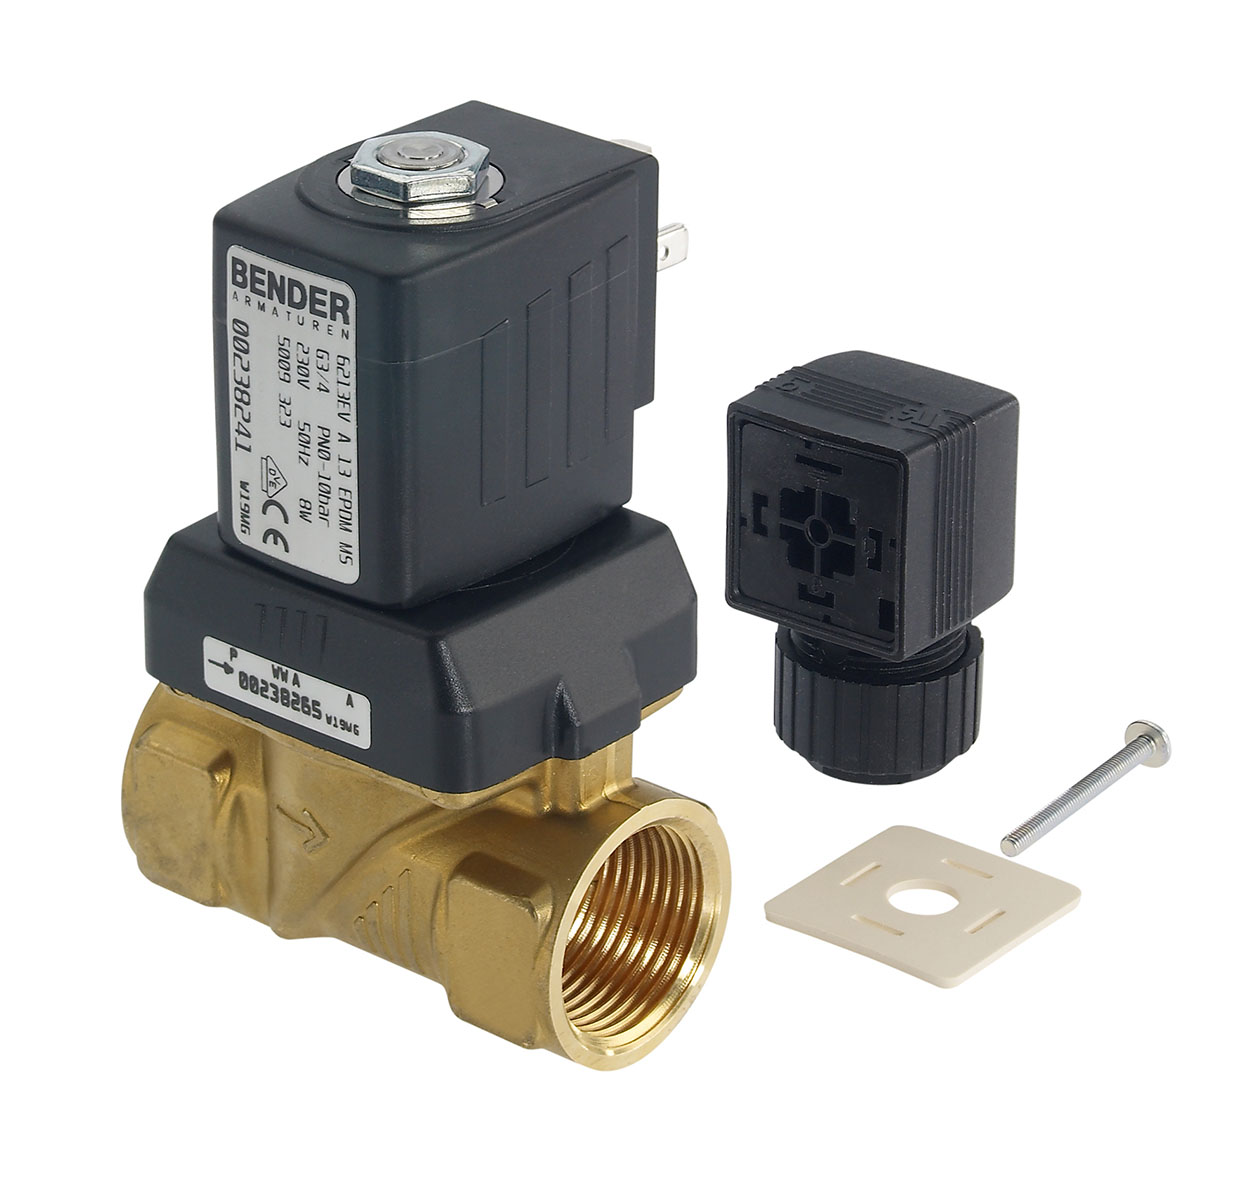 5009332 - 2/2 way solenoidvalve normally closed for fluids Type 1; female thread